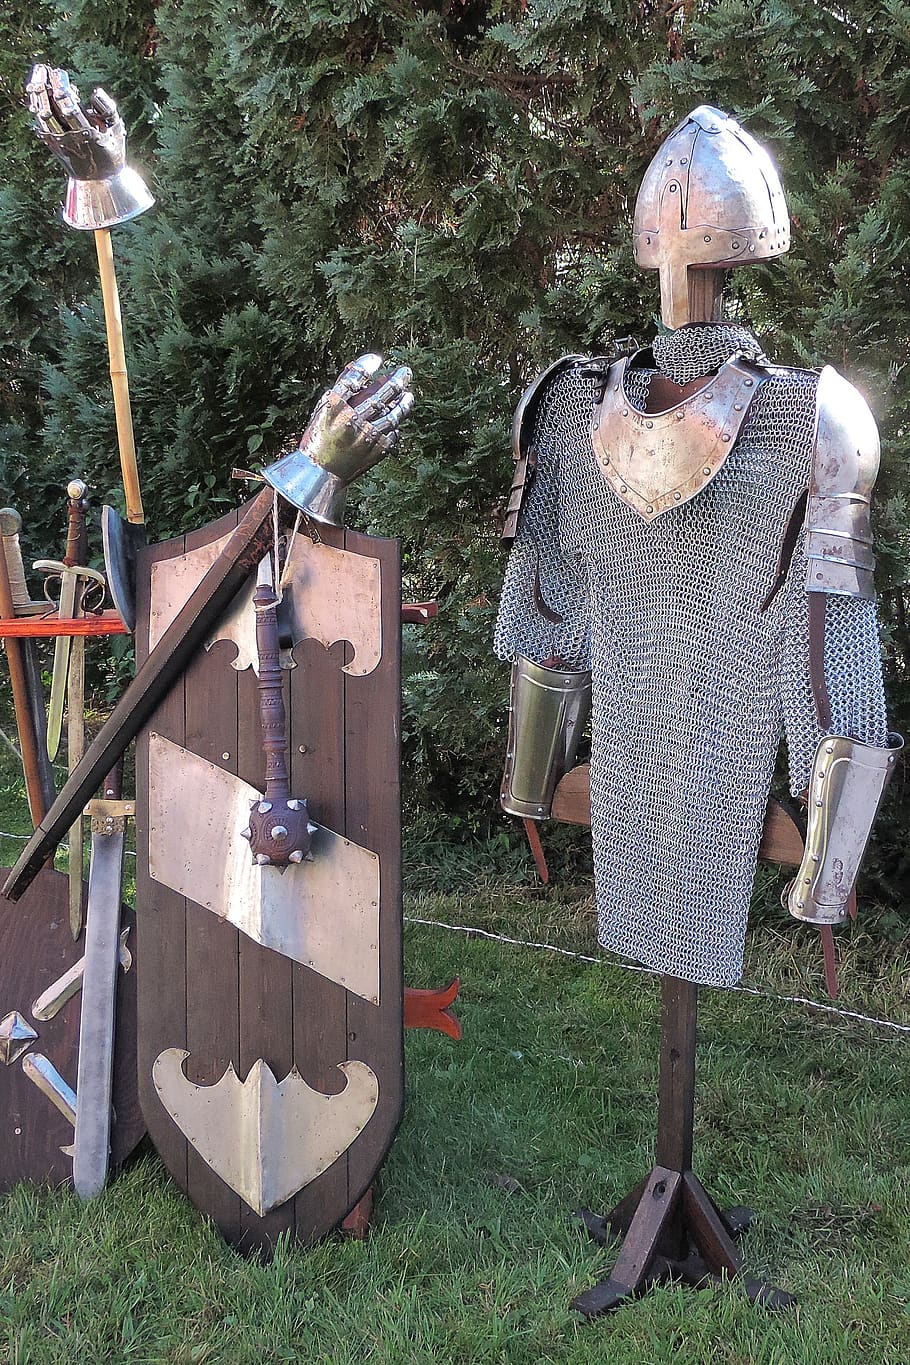 armor, knight, ritterruestung, helm, middle ages, metal, harnisch, plant, women, real people